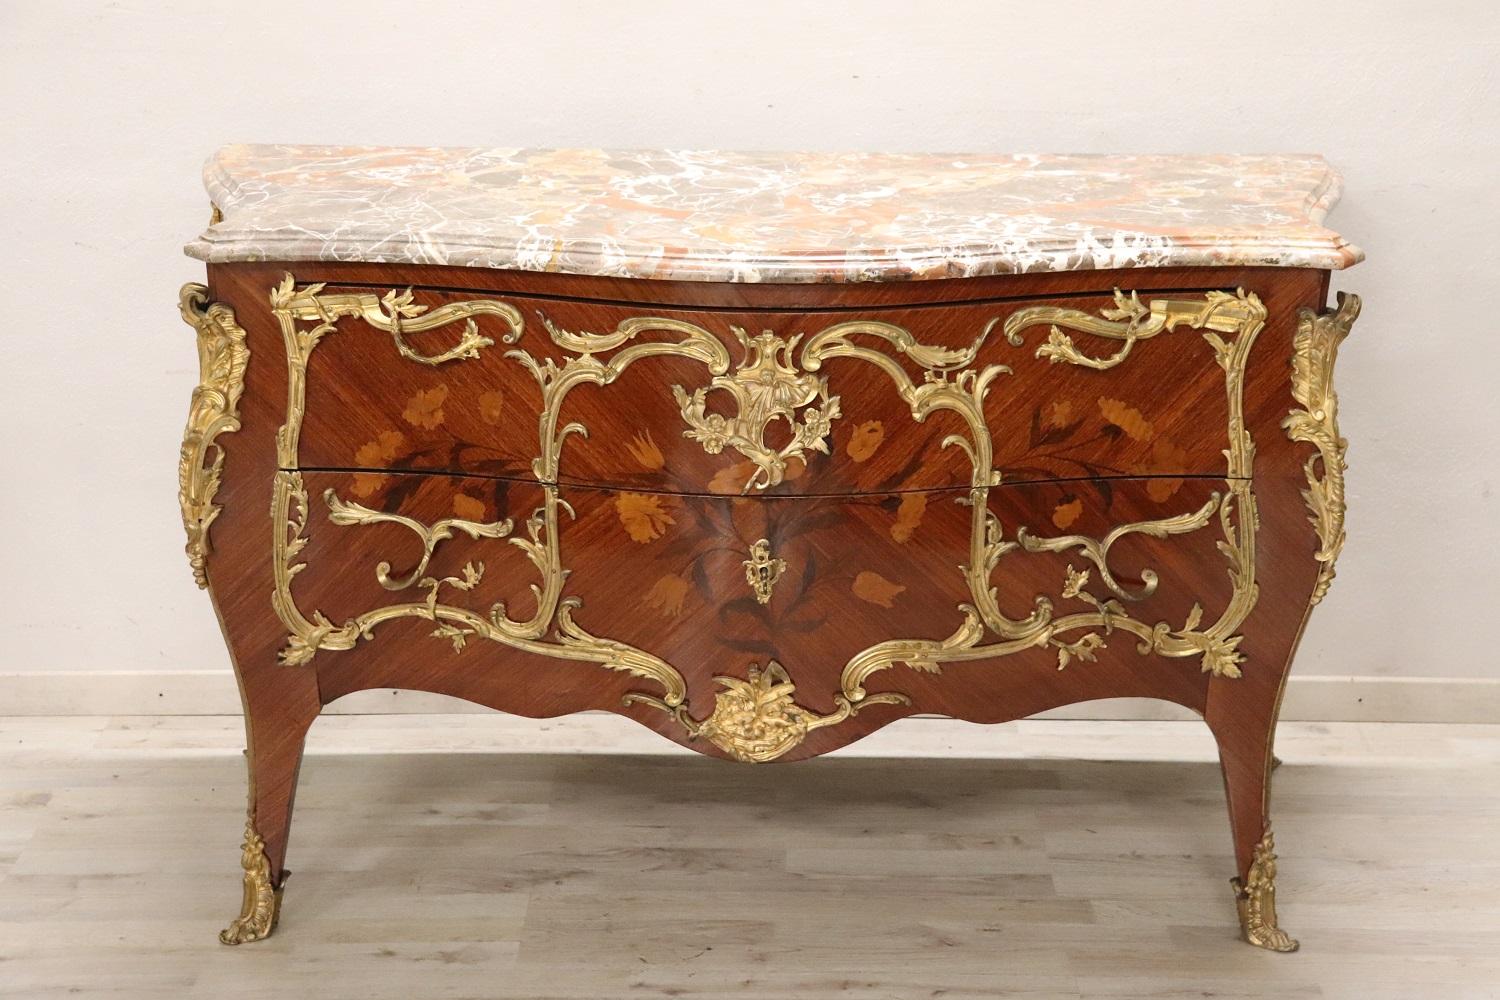 Important and rare france of the period Napoleon III antique majestic chest of drawers. Characterized by a rounded shape on the front and slender wavy legs. Refined floral-style inlaid decoration made using different woods of precious essences. The